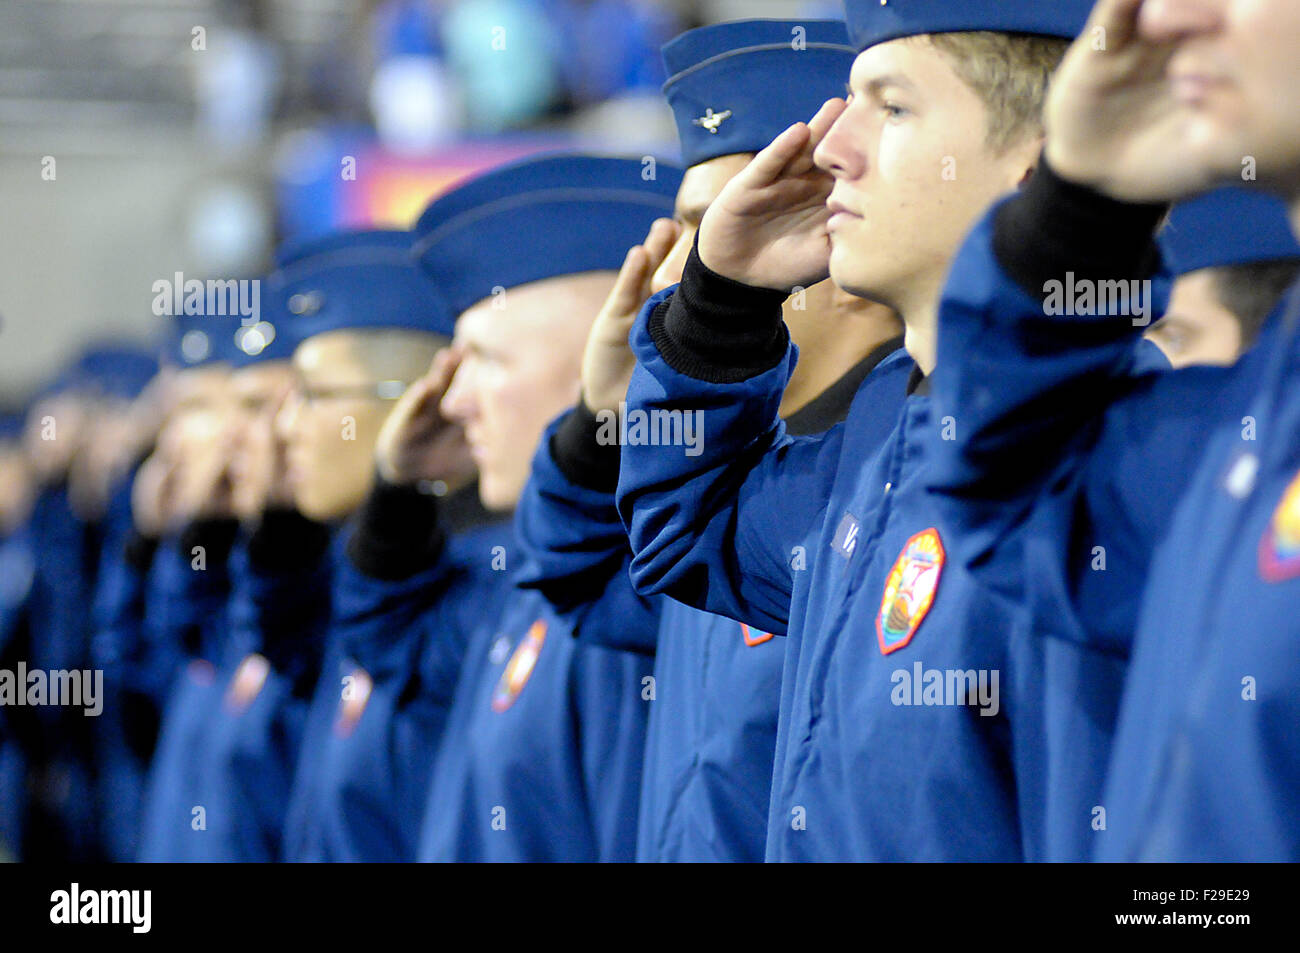 Colorado Springs, Colorado, USA. 12th Sep, 2015. The Air Force Academy Corps of Cadets at attention prior to Mountain West Conference action between the San Jose State Spartans and the Air Force Academy Falcons at Falcon Stadium, U.S. Air Force Academy, Colorado Springs, Colorado. Air Force defeats San Jose State 37-16. © csm/Alamy Live News Stock Photo